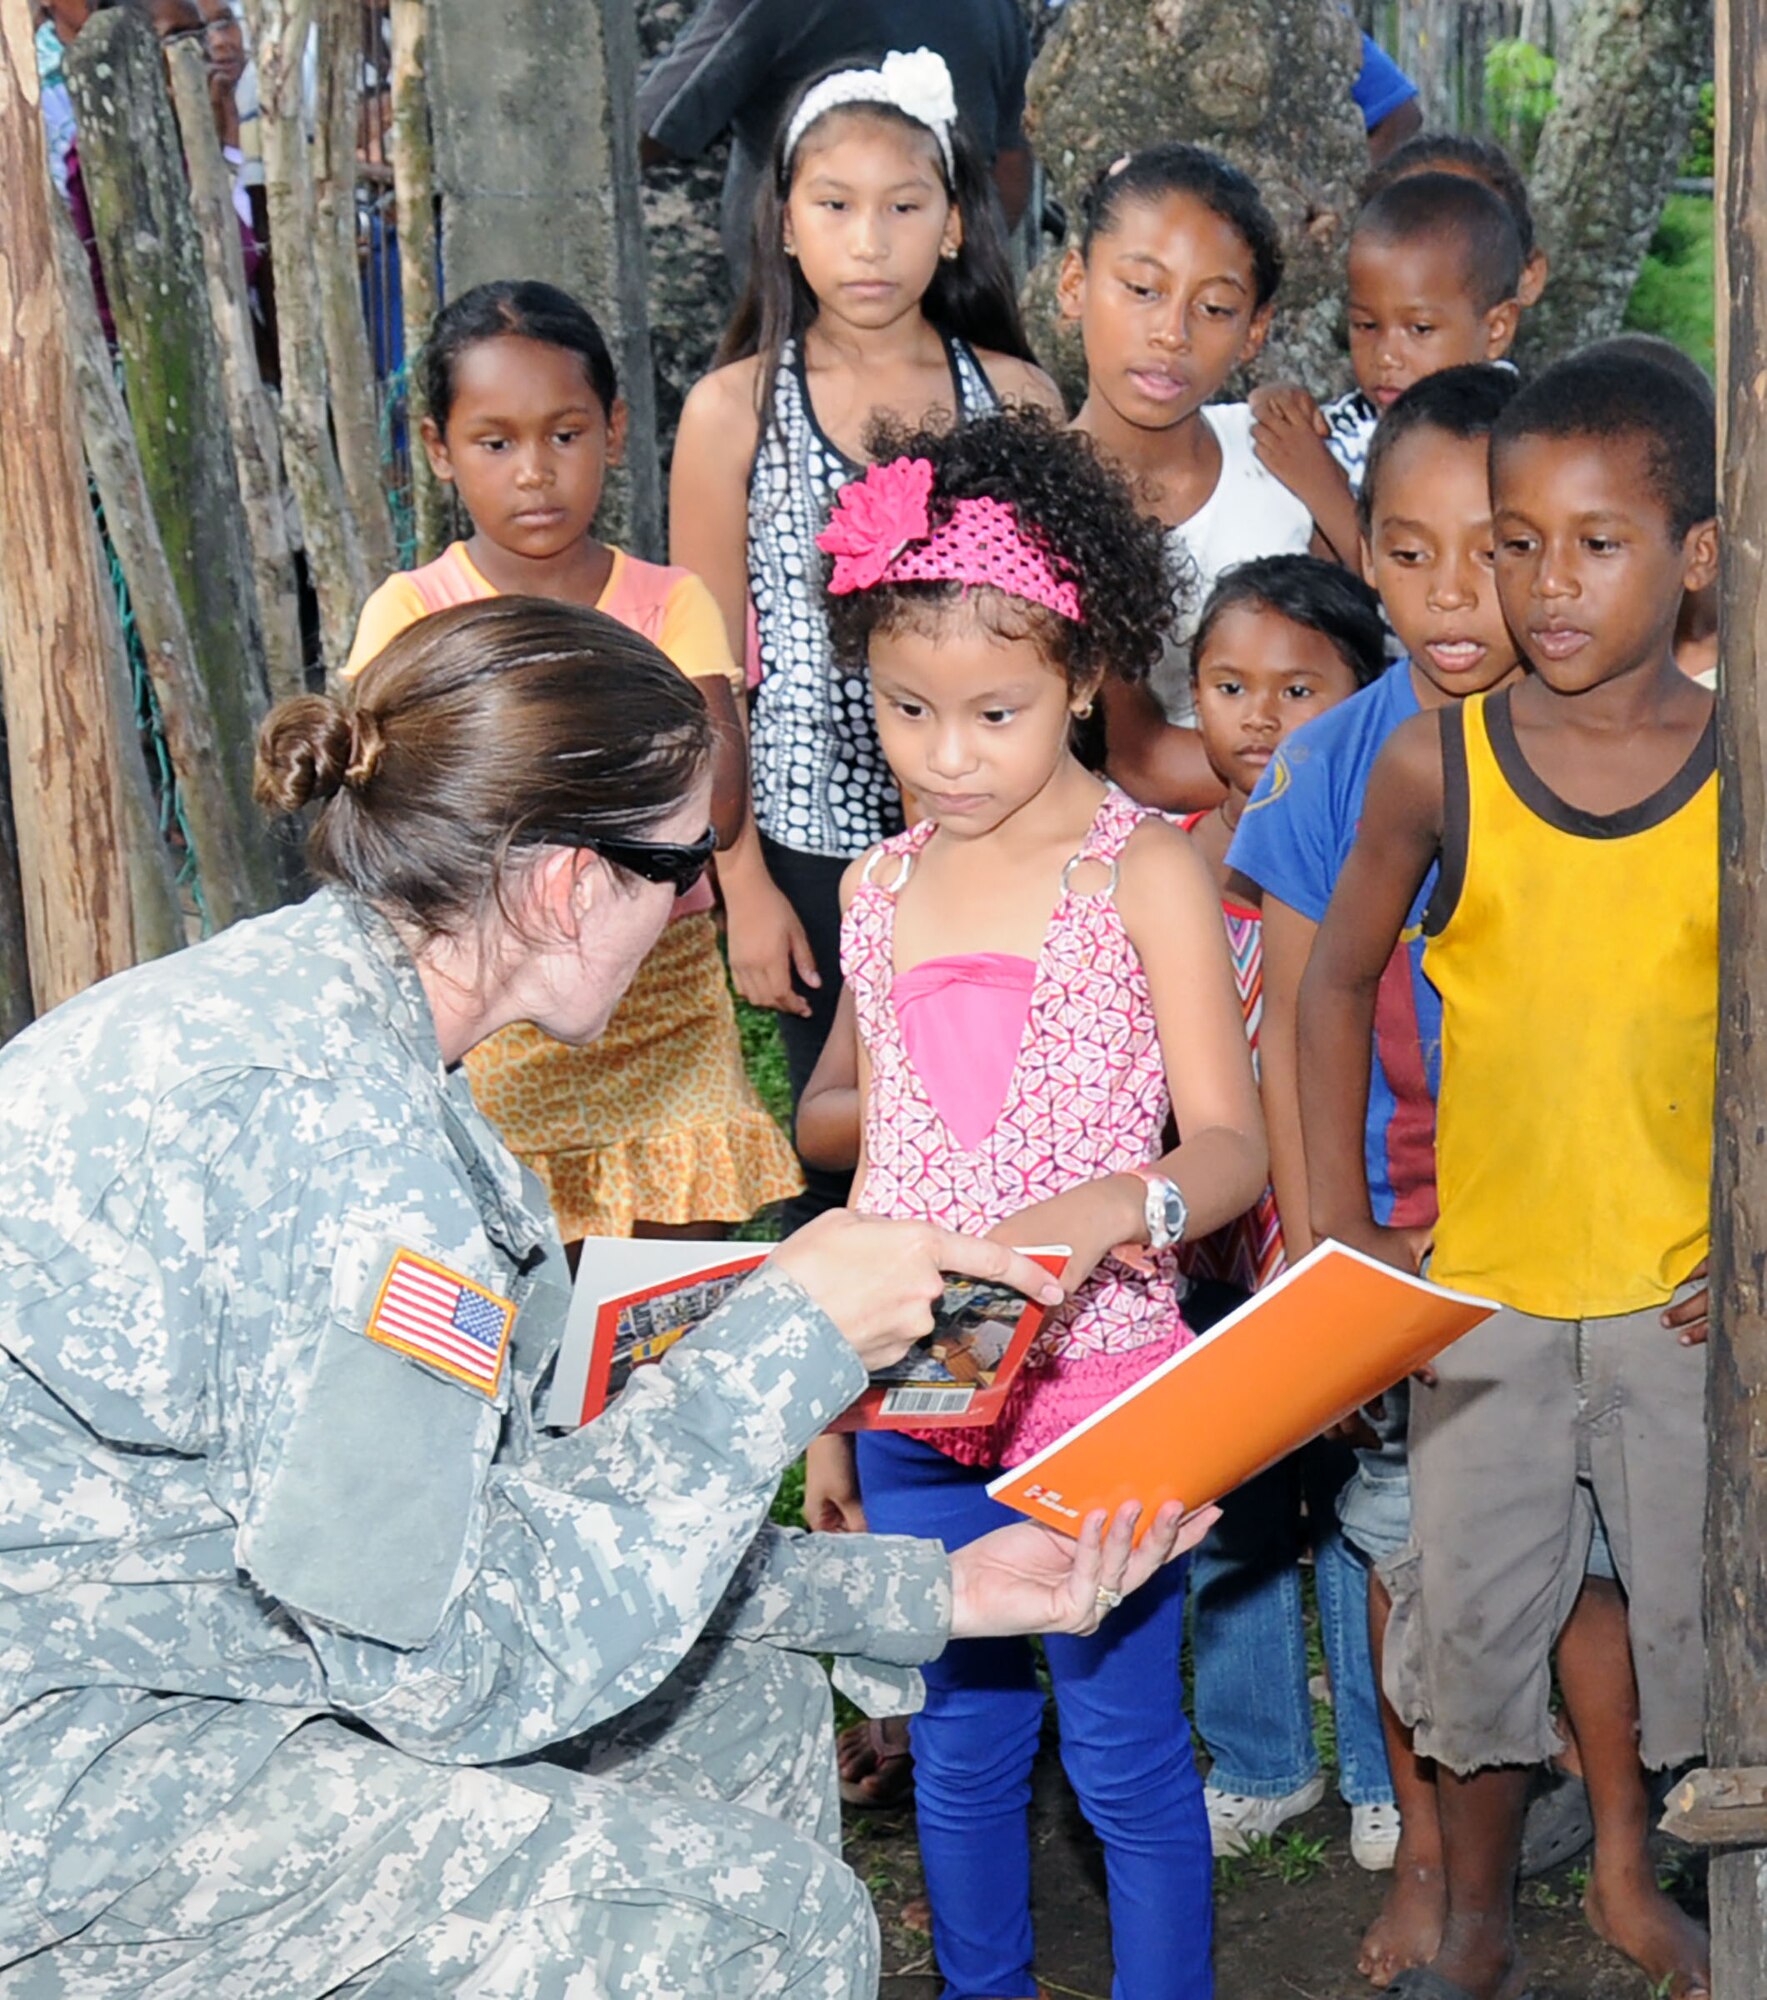 U. S. Army Capt. Erin Velazquez gives a Honduran child a Spanish reading book during a MEDRETE.  Joint Task Force -Bravo's Medical Element (MEDEL), with support from 1-228th Aviation Regiment, JTF-Bravo Joint Security Forces and Army Forces Battalion, partnered with the Honduras Ministry of Health and the Honduran military to provide medical care to more than 650 people in the remote village of Barra Patuca in the Department of Gracias a Dios, Honduras, during a Medical Readiness Training Exercise (MEDRETE), July 17, 2014.  The multi-national team worked together to provide preventative medicine to the villagers, including classes on hygiene, preventative dental care, and nutrition. They also provided immunizations to infants, dental care, wellness checkups, medications, and minor medical procedures.  (Photo by U. S. Air National Guard Capt. Steven Stubbs)